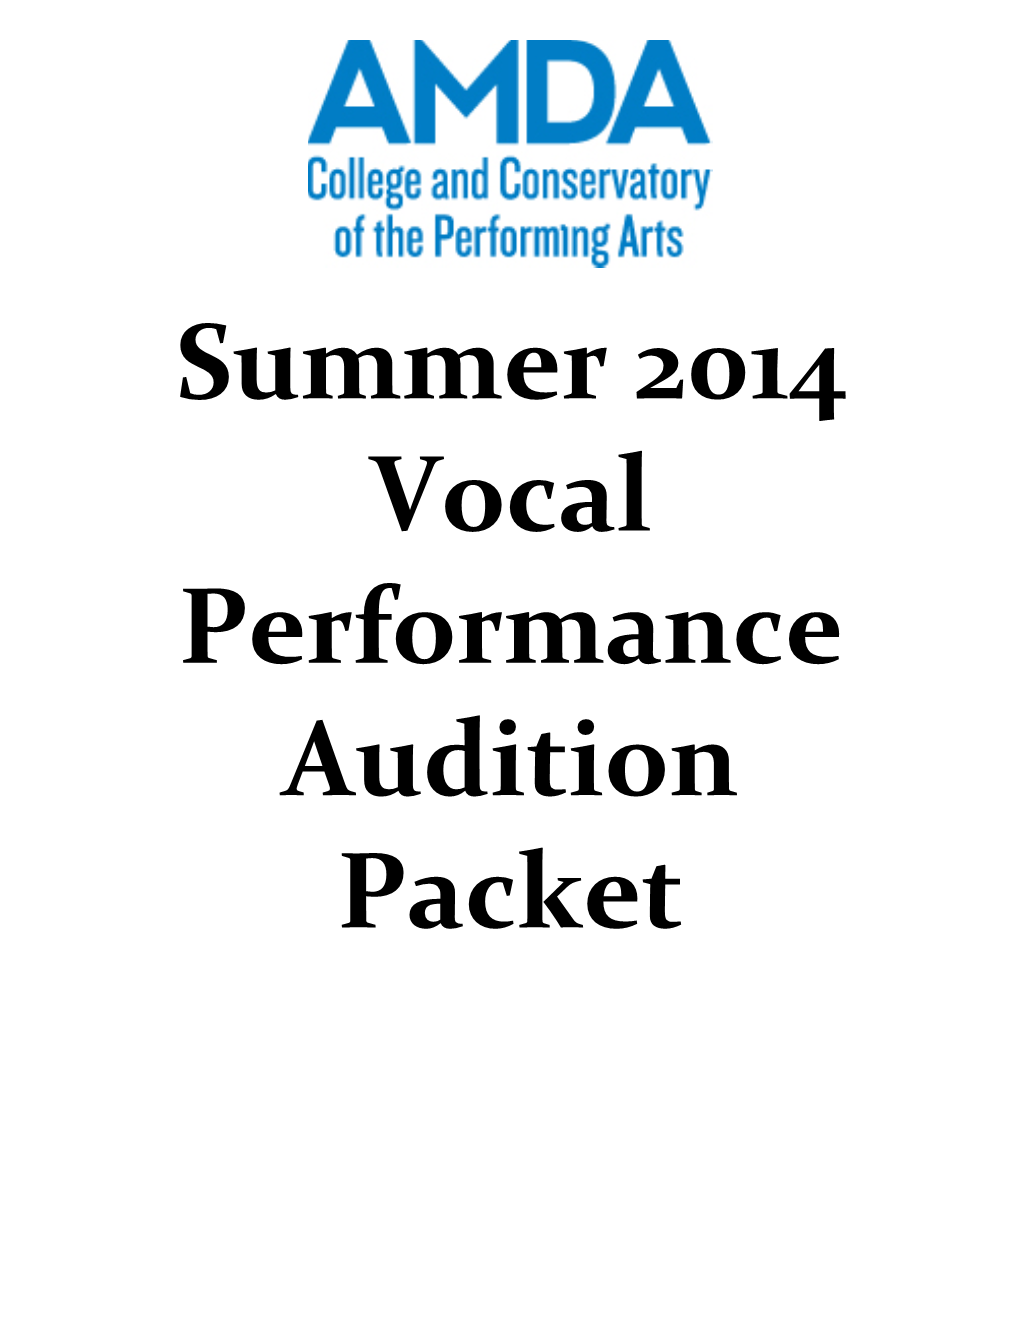 Summer 2014 Vocal Performance Audition Packet